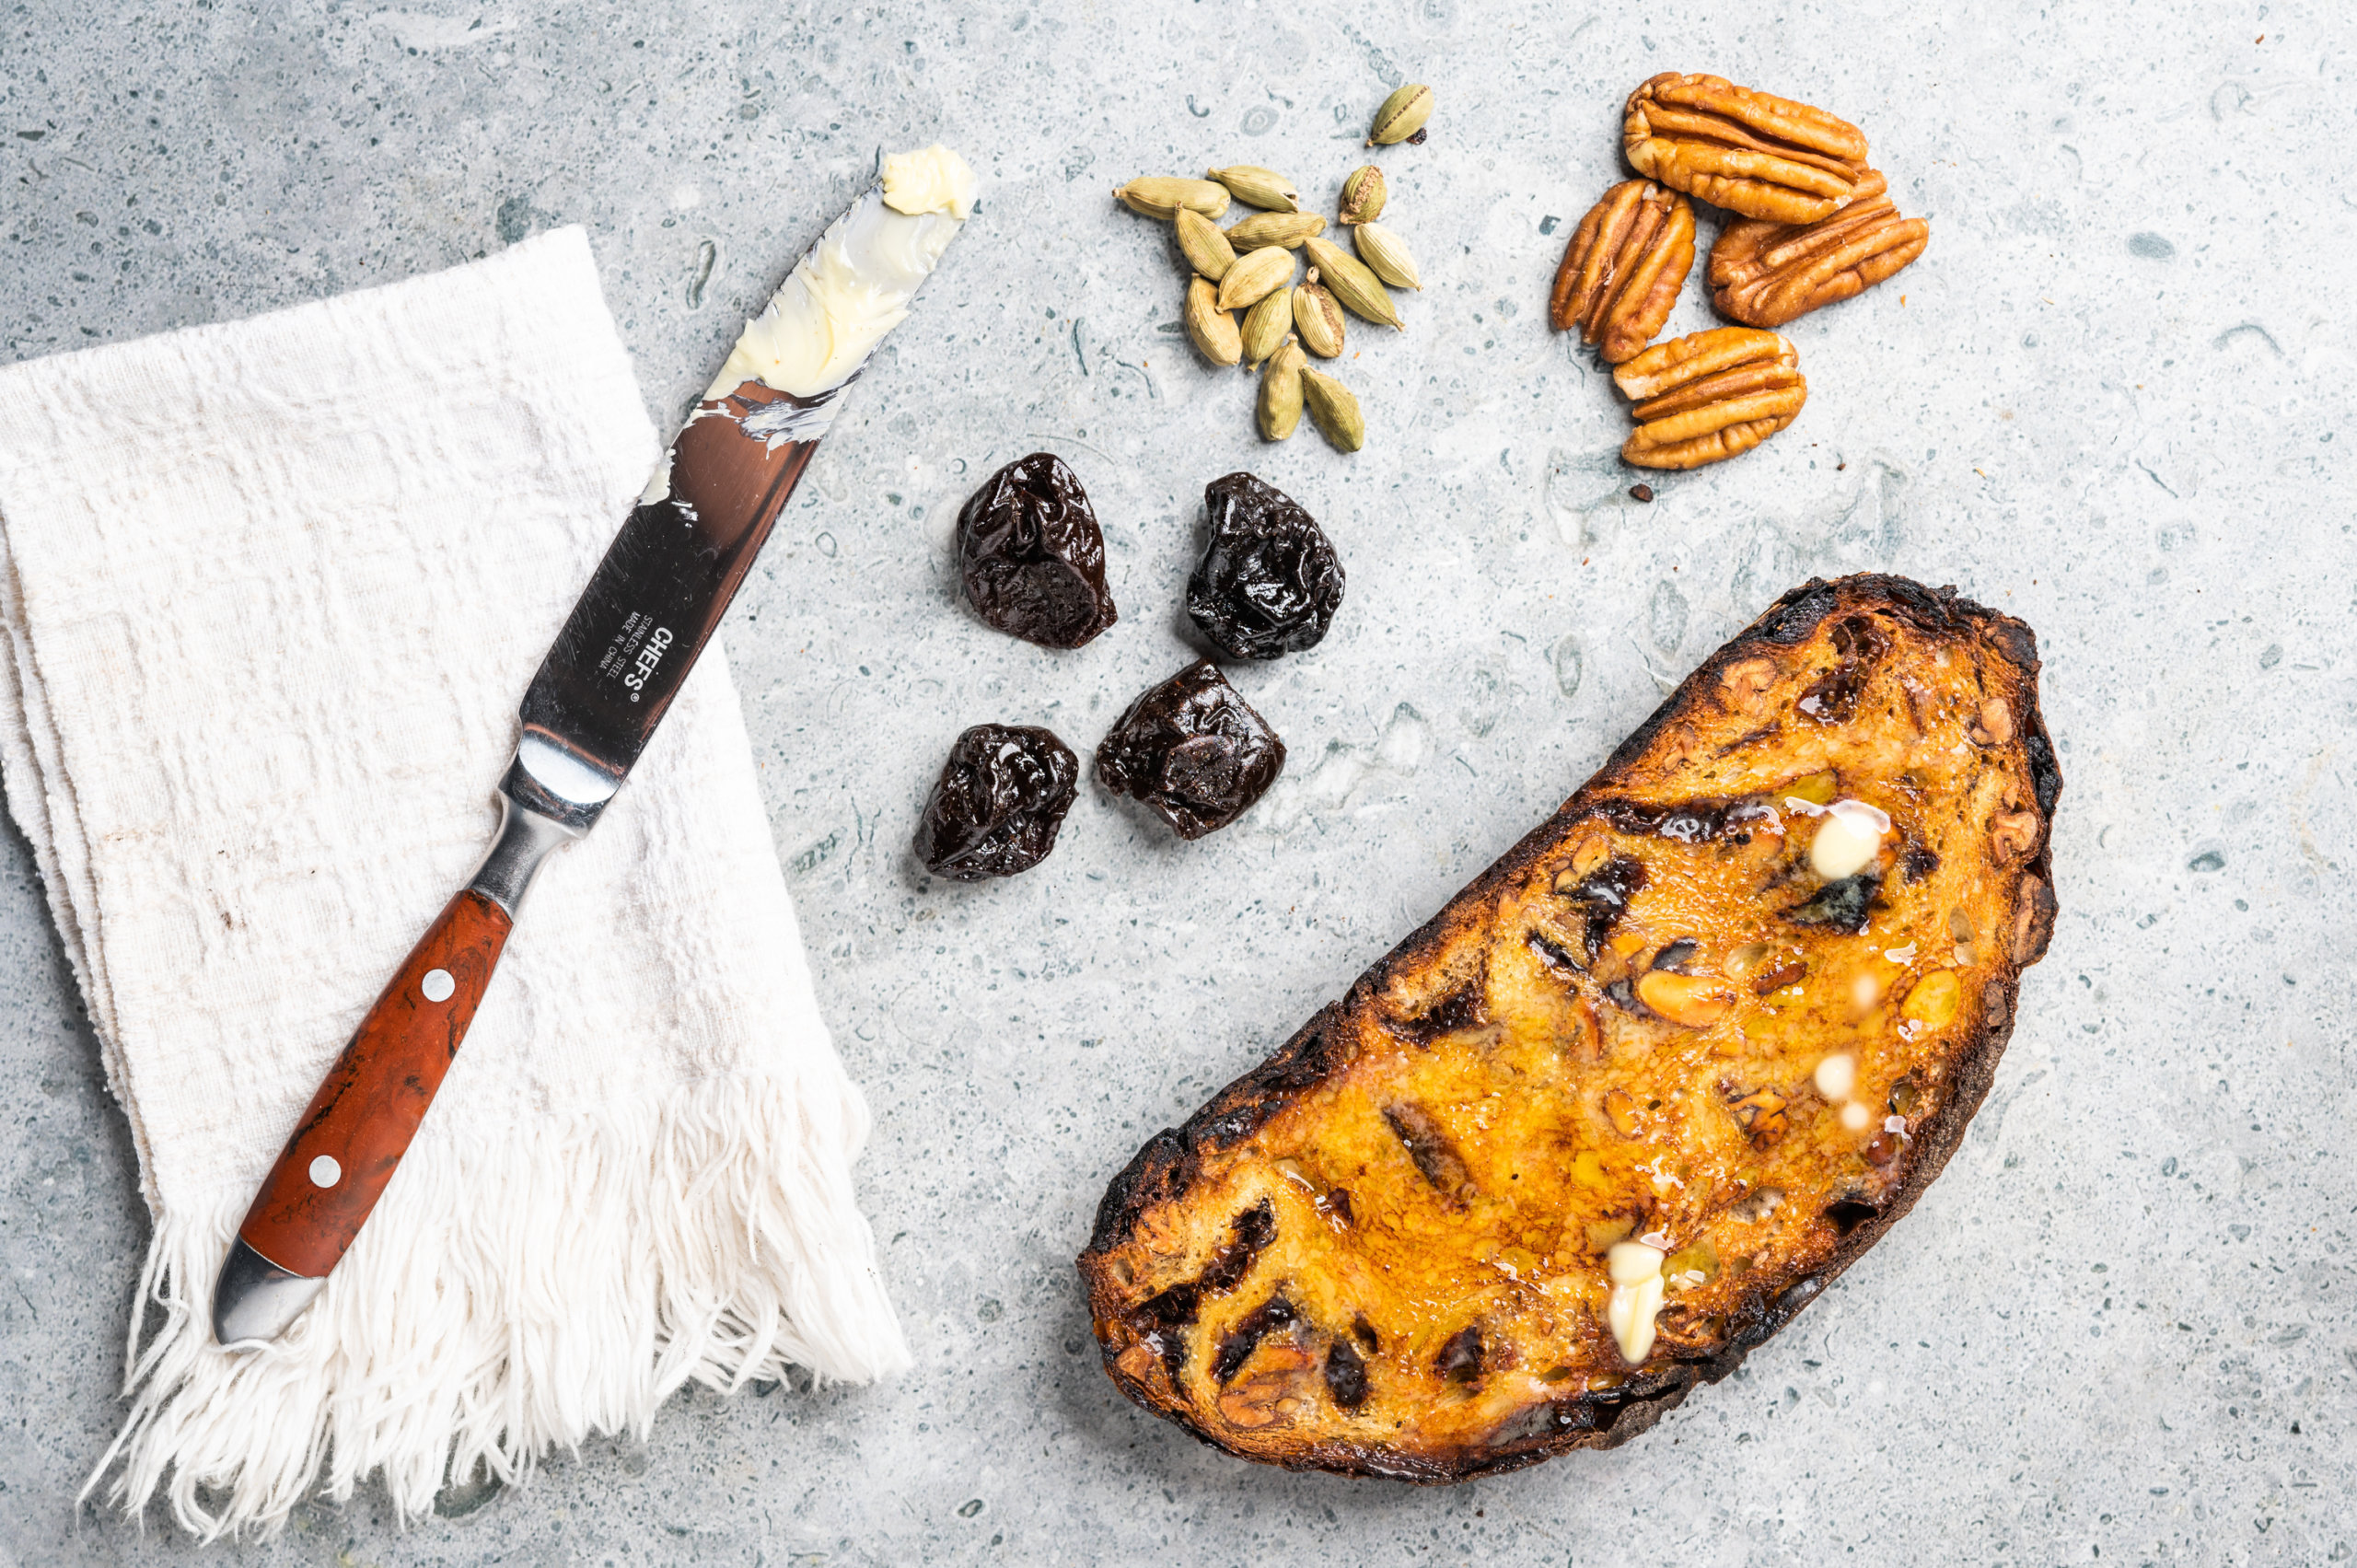 A butter knife next to toasted bread, California prunes, pecans and cardamom pods